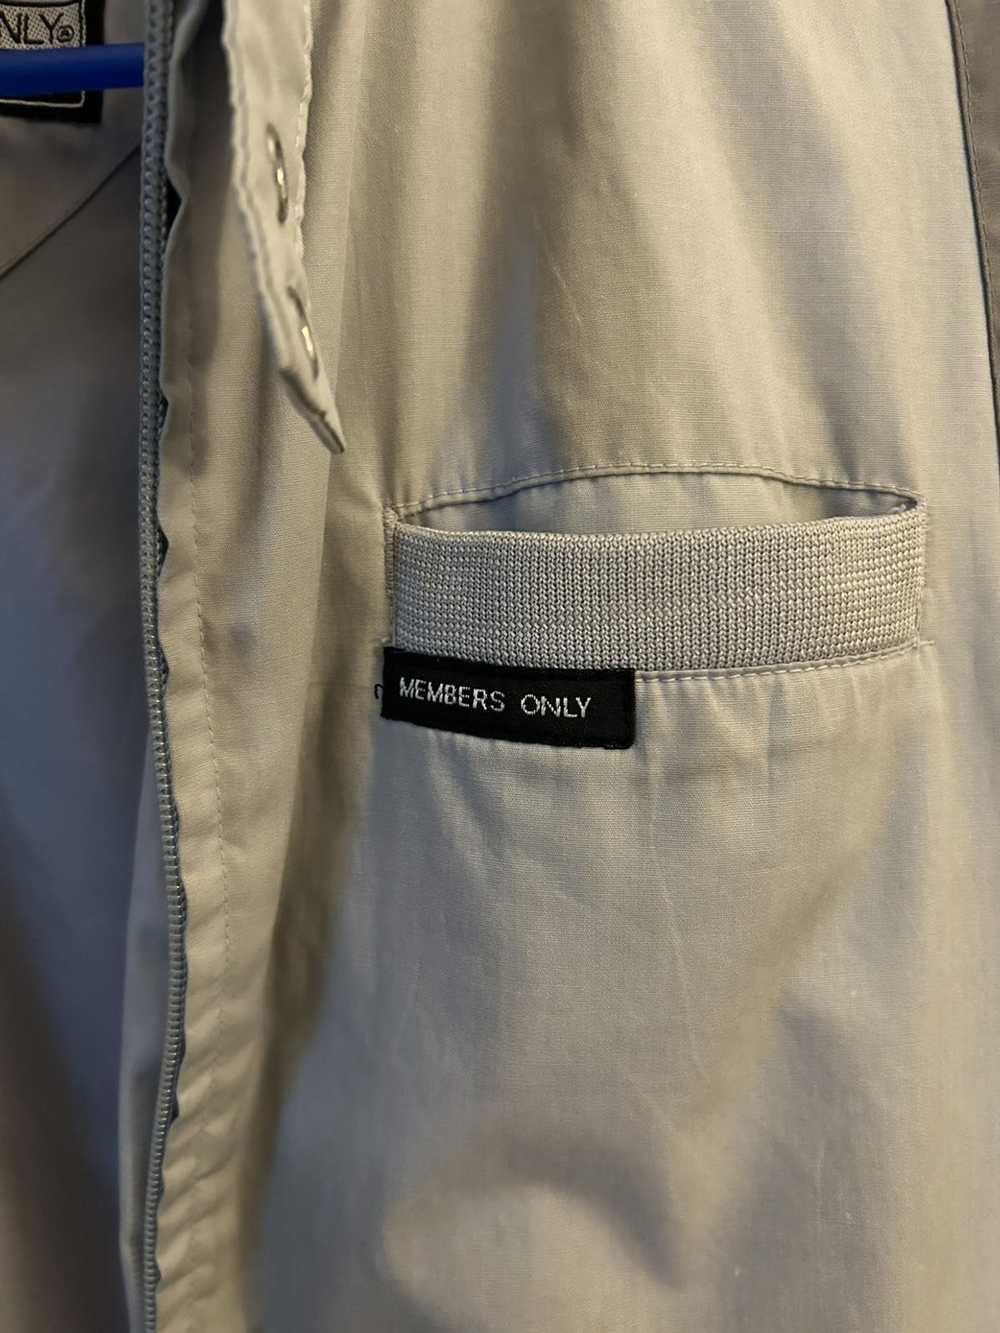 Members Only Members Only Jacket - image 4